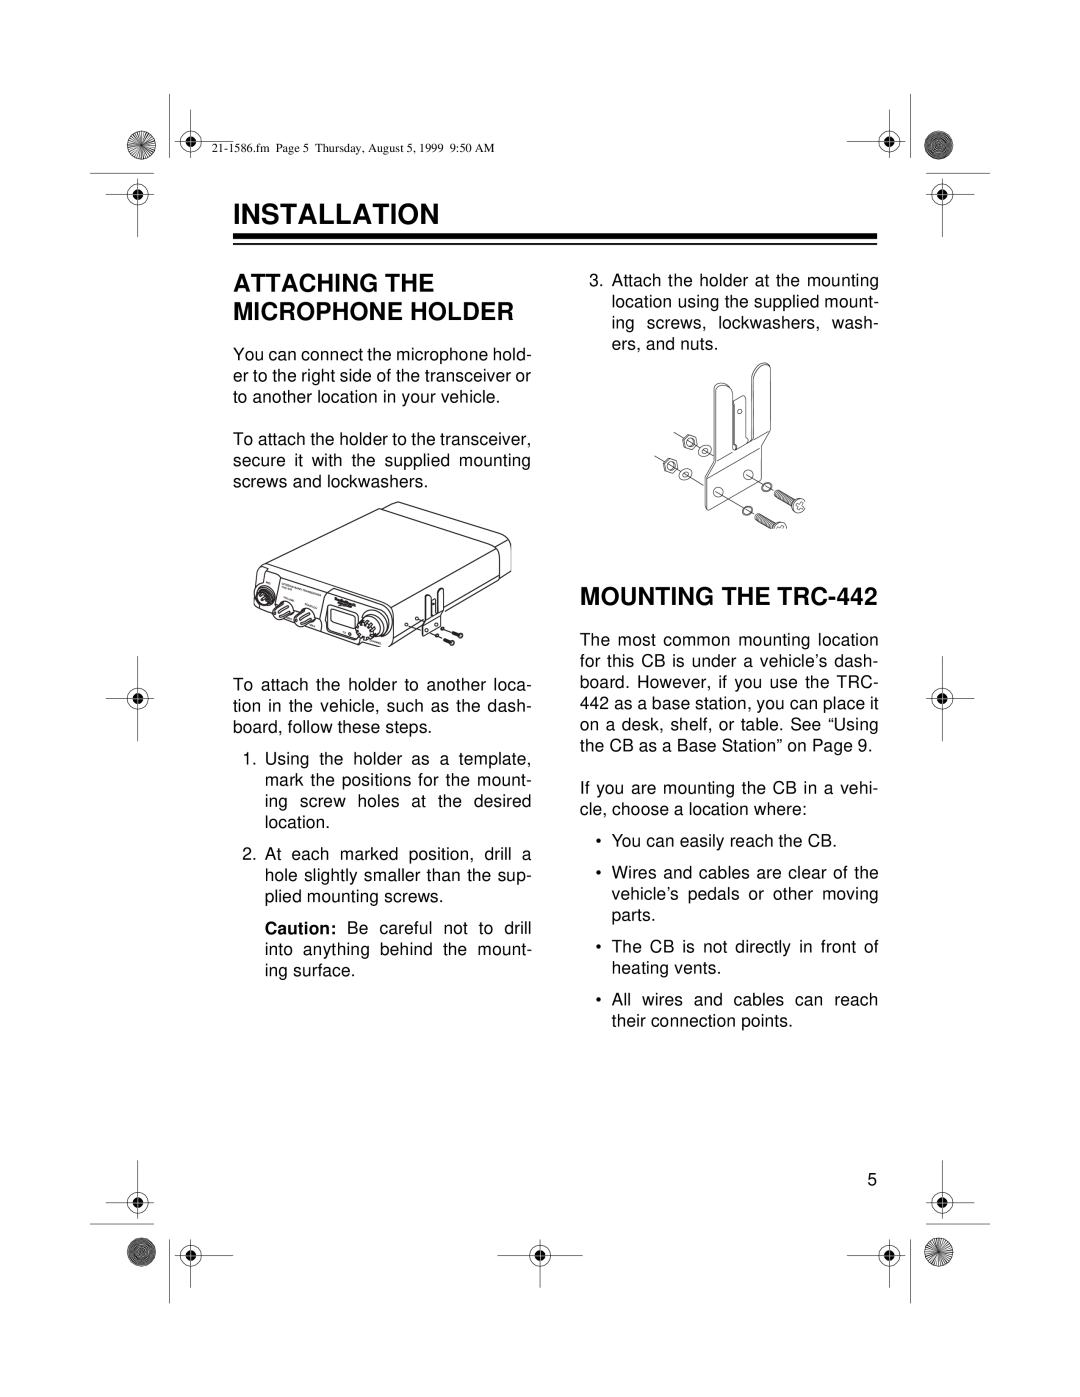 Radio Shack owner manual Installation, Attaching The Microphone Holder, MOUNTING THE TRC-442 